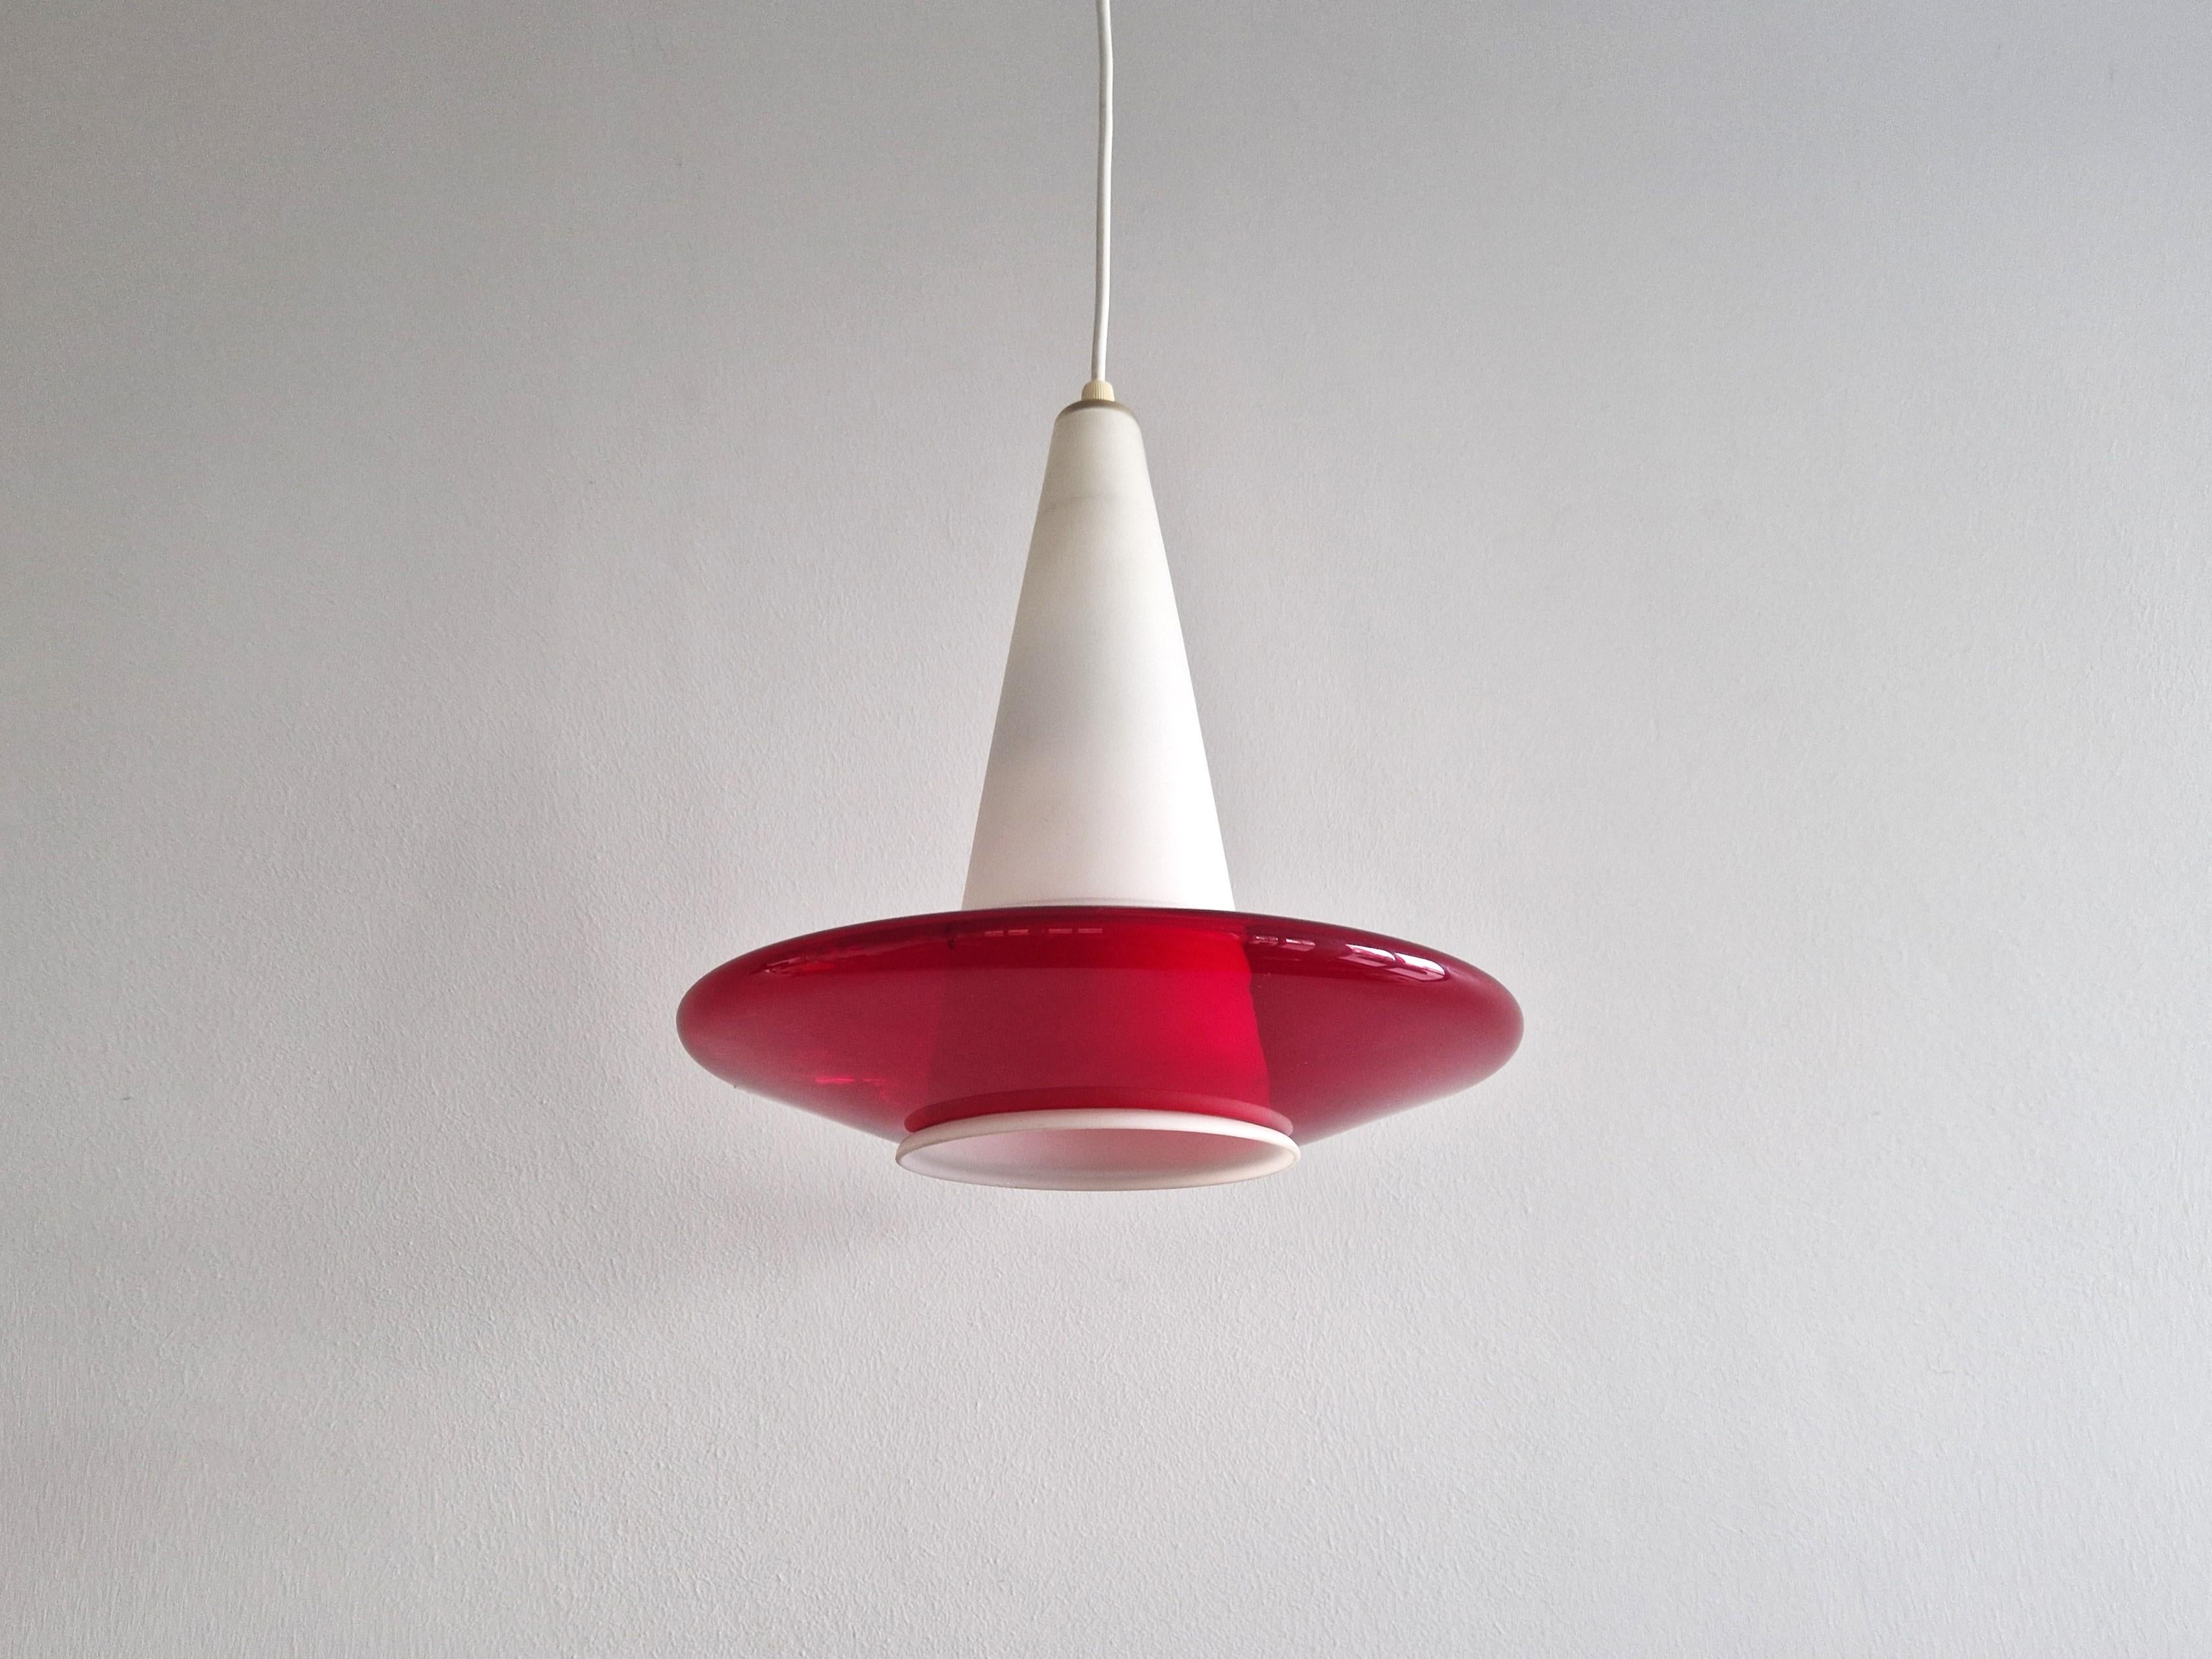 This stunning pendant lamp is made out of white opaline glass surrounded with a clear red glass UFO shaped shade. In the style of Louis Kalff for Philips or Peil und Putzler with resemblance also to designs of Nordisk Solar. We haven't seen this